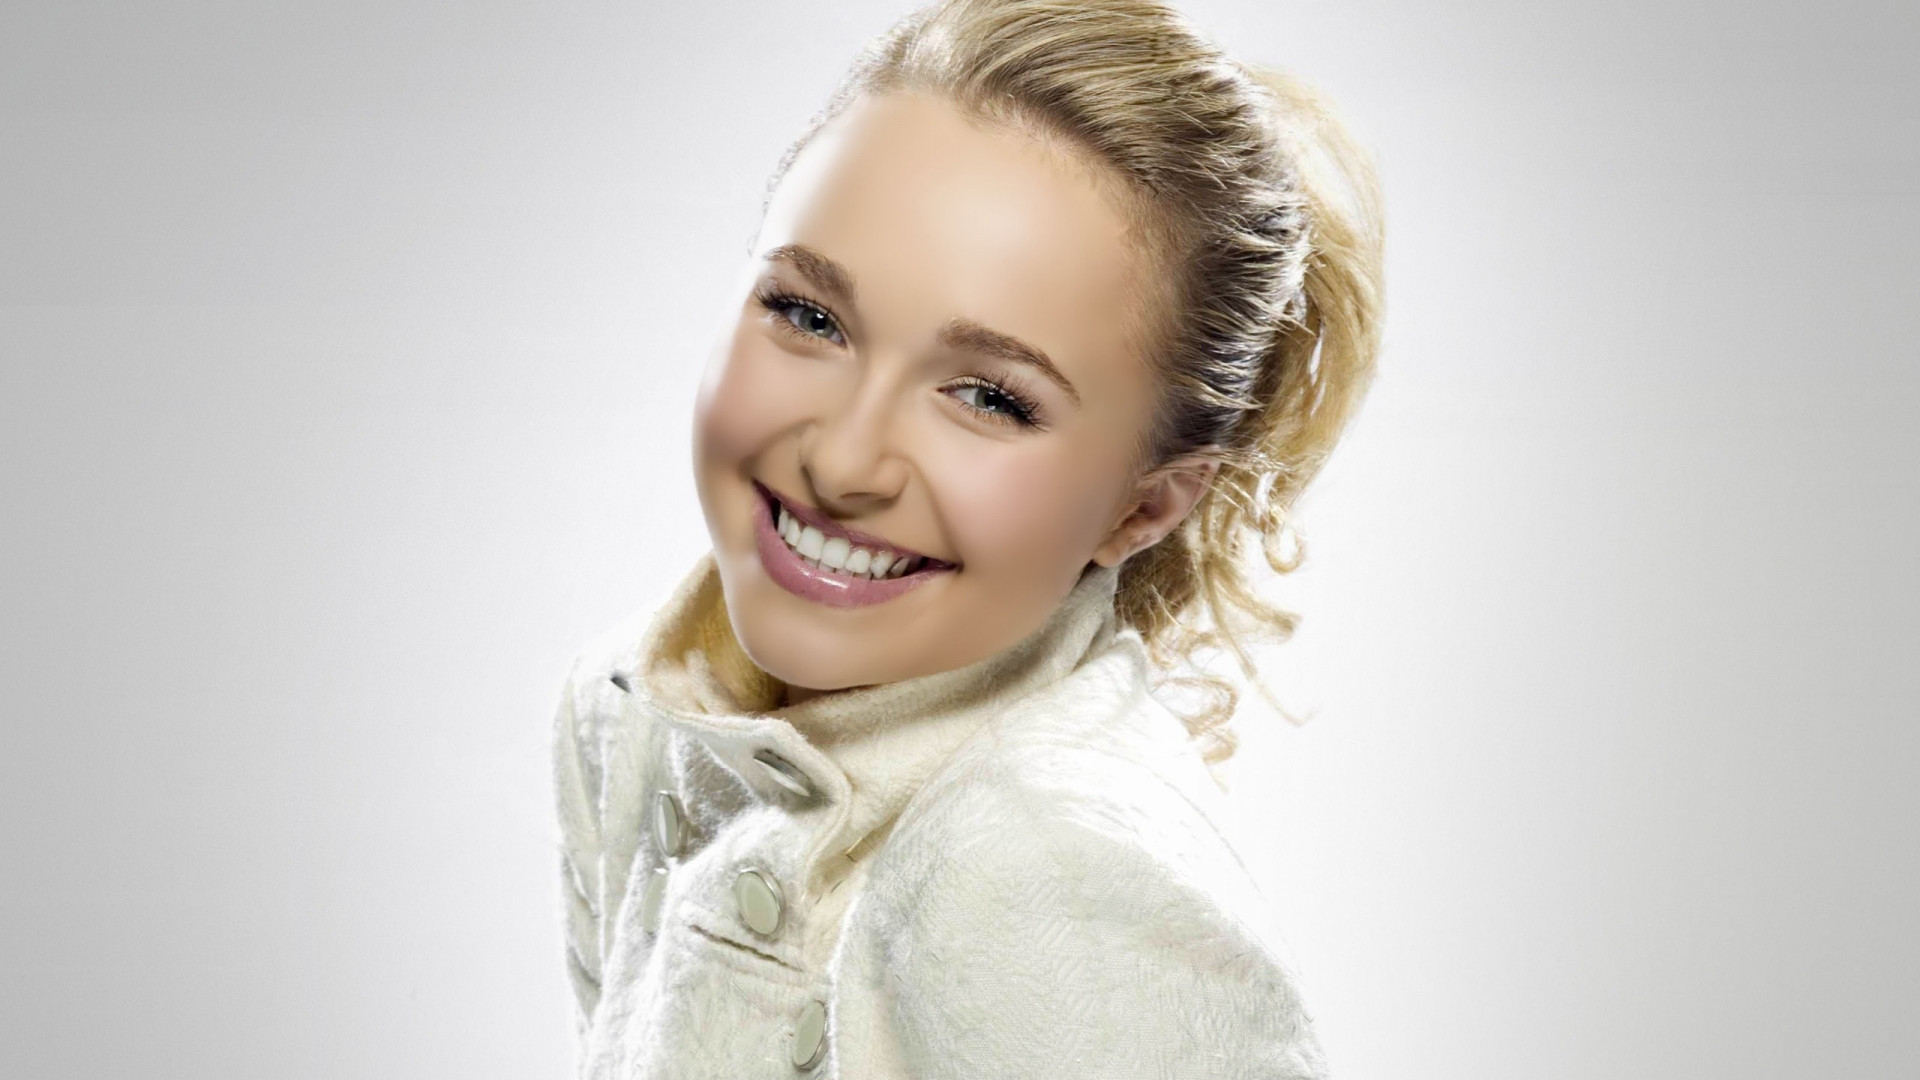 Hayden Panettiere Cute Smile for 1920 x 1080 HDTV 1080p resolution